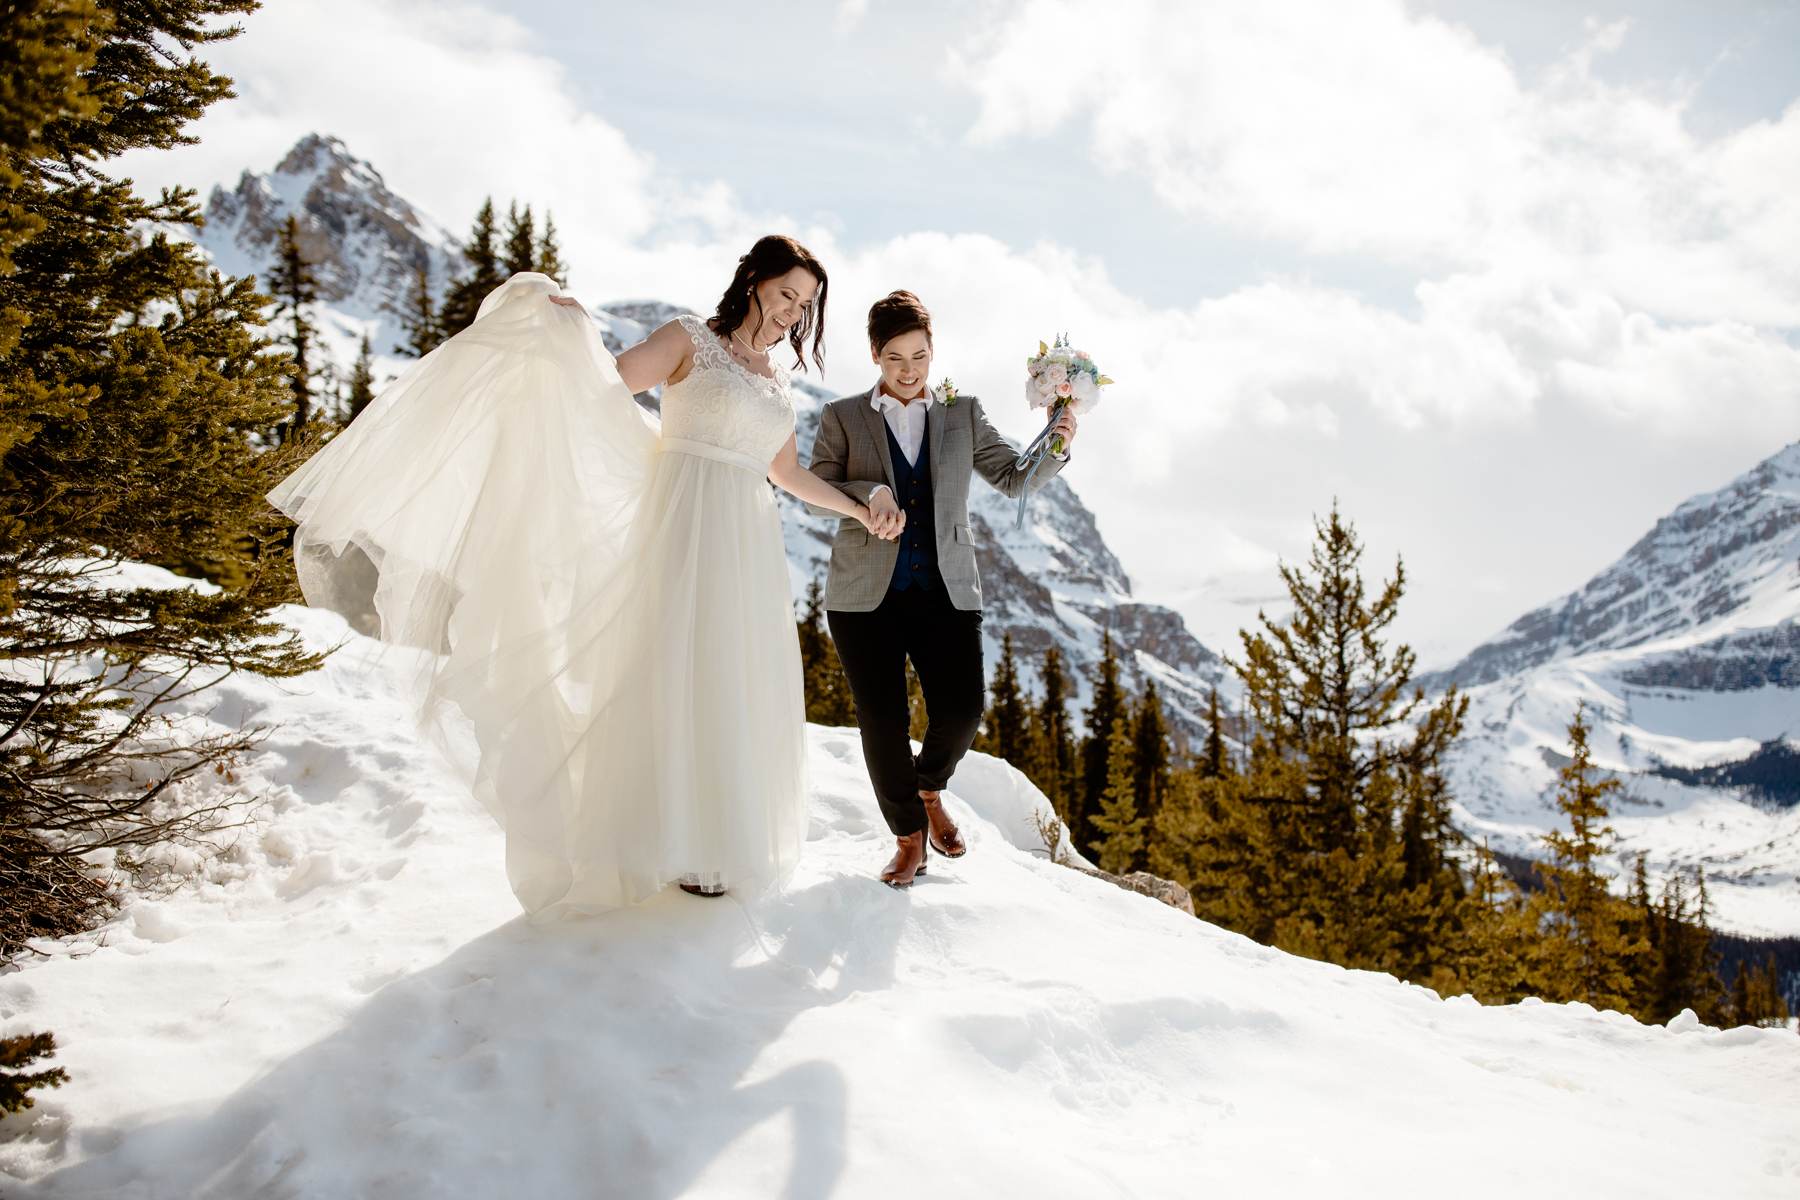 Banff National Park Elopement Photography with LGBTQ-friendly photographers - Image 7